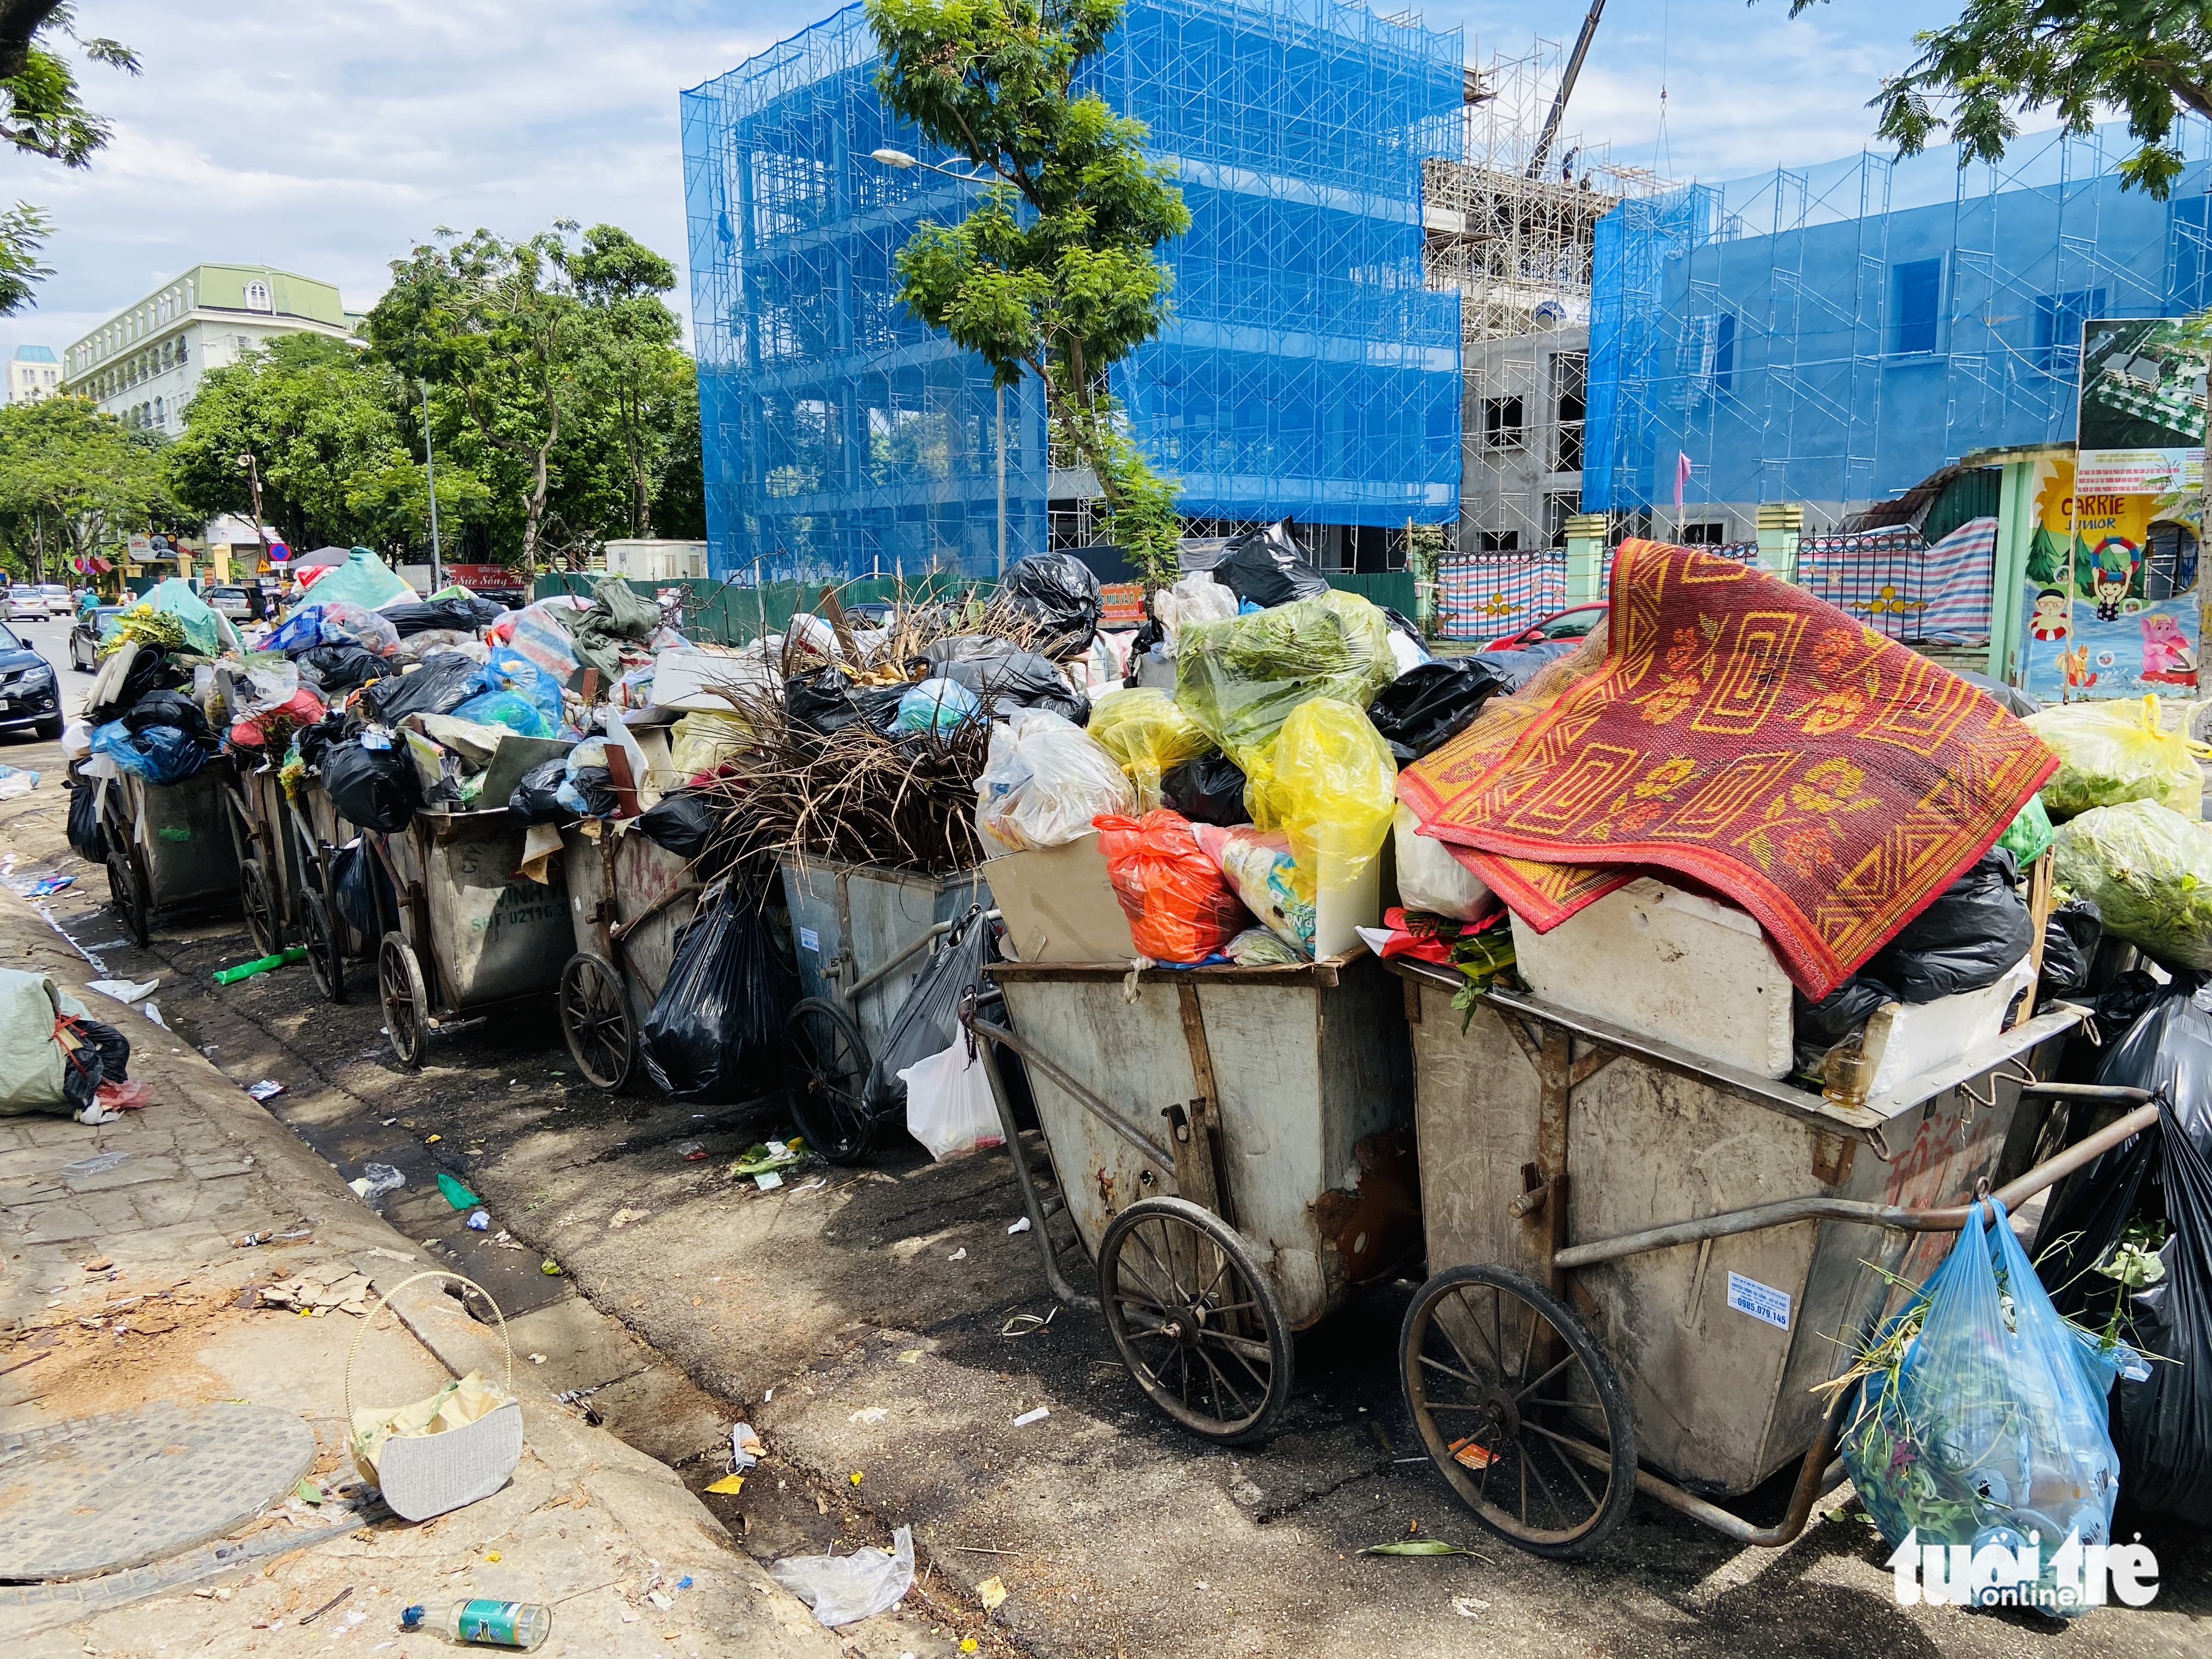 Garbage piles up on Tran Quoc Hoan Street in Cau Giay District, Hanoi, June 17, 2022. Photo: Q. The / Tuoi Tre